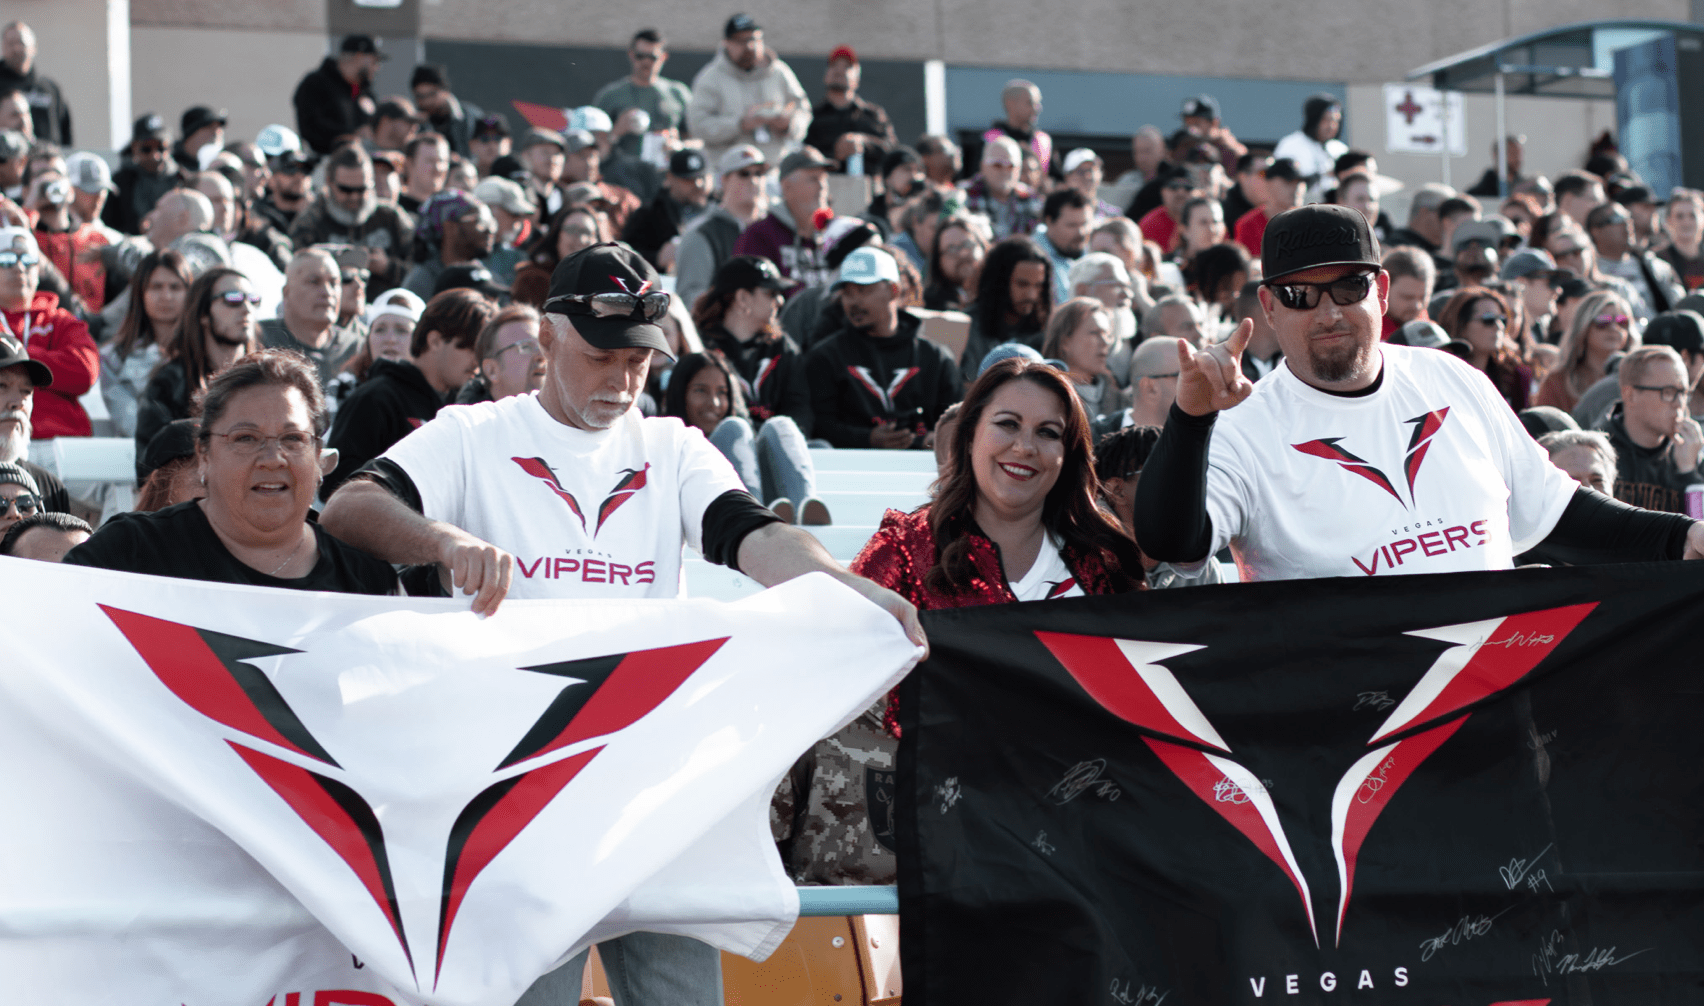 XFL Attendance: Vegas fans barely pass 6,000 fans in their week 6 with St. Louis